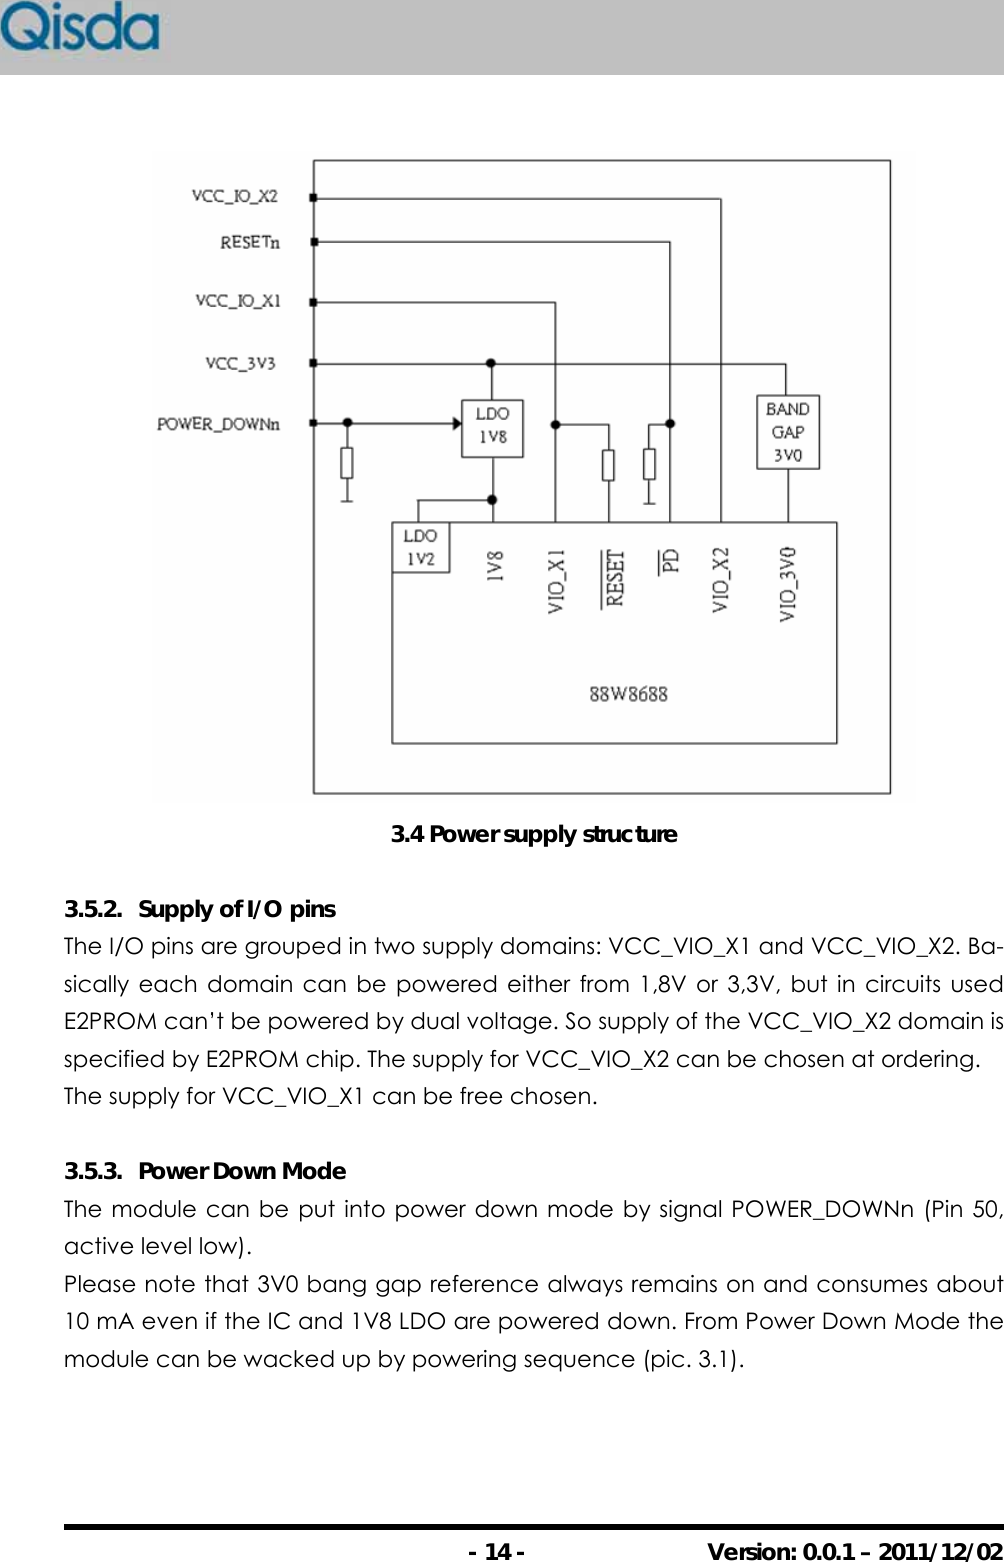                                                - 14 -  Version: 0.0.1 – 2011/12/02  3.4 Power supply structure  3.5.2.  Supply of I/O pins The I/O pins are grouped in two supply domains: VCC_VIO_X1 and VCC_VIO_X2. Ba-sically each domain can be powered either from 1,8V or 3,3V, but in circuits used E2PROM can’t be powered by dual voltage. So supply of the VCC_VIO_X2 domain is specified by E2PROM chip. The supply for VCC_VIO_X2 can be chosen at ordering. The supply for VCC_VIO_X1 can be free chosen.  3.5.3.  Power Down Mode The module can be put into power down mode by signal POWER_DOWNn (Pin 50, active level low). Please note that 3V0 bang gap reference always remains on and consumes about 10 mA even if the IC and 1V8 LDO are powered down. From Power Down Mode the module can be wacked up by powering sequence (pic. 3.1).  